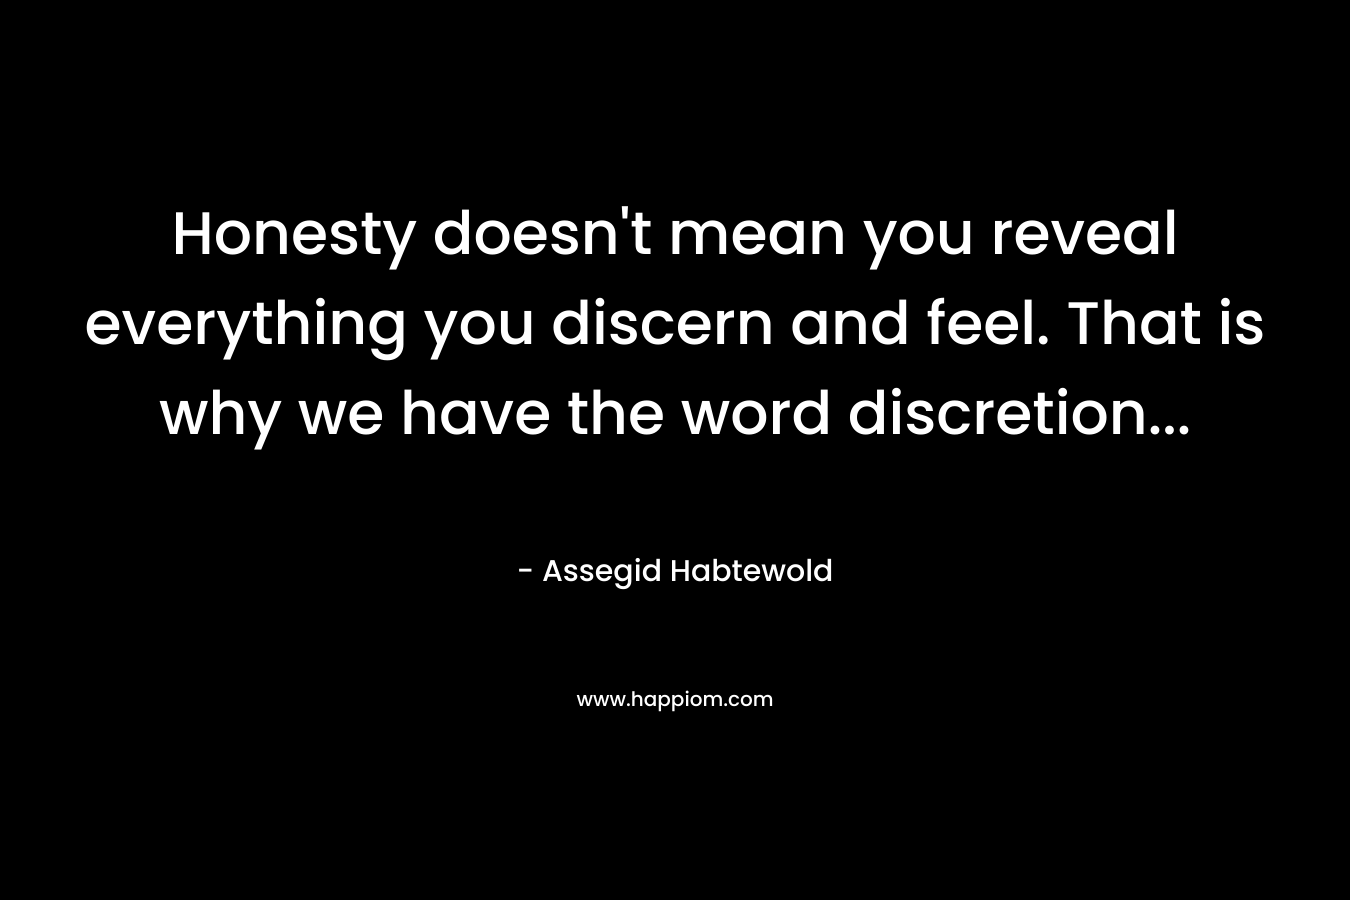 Honesty doesn’t mean you reveal everything you discern and feel. That is why we have the word discretion… – Assegid Habtewold